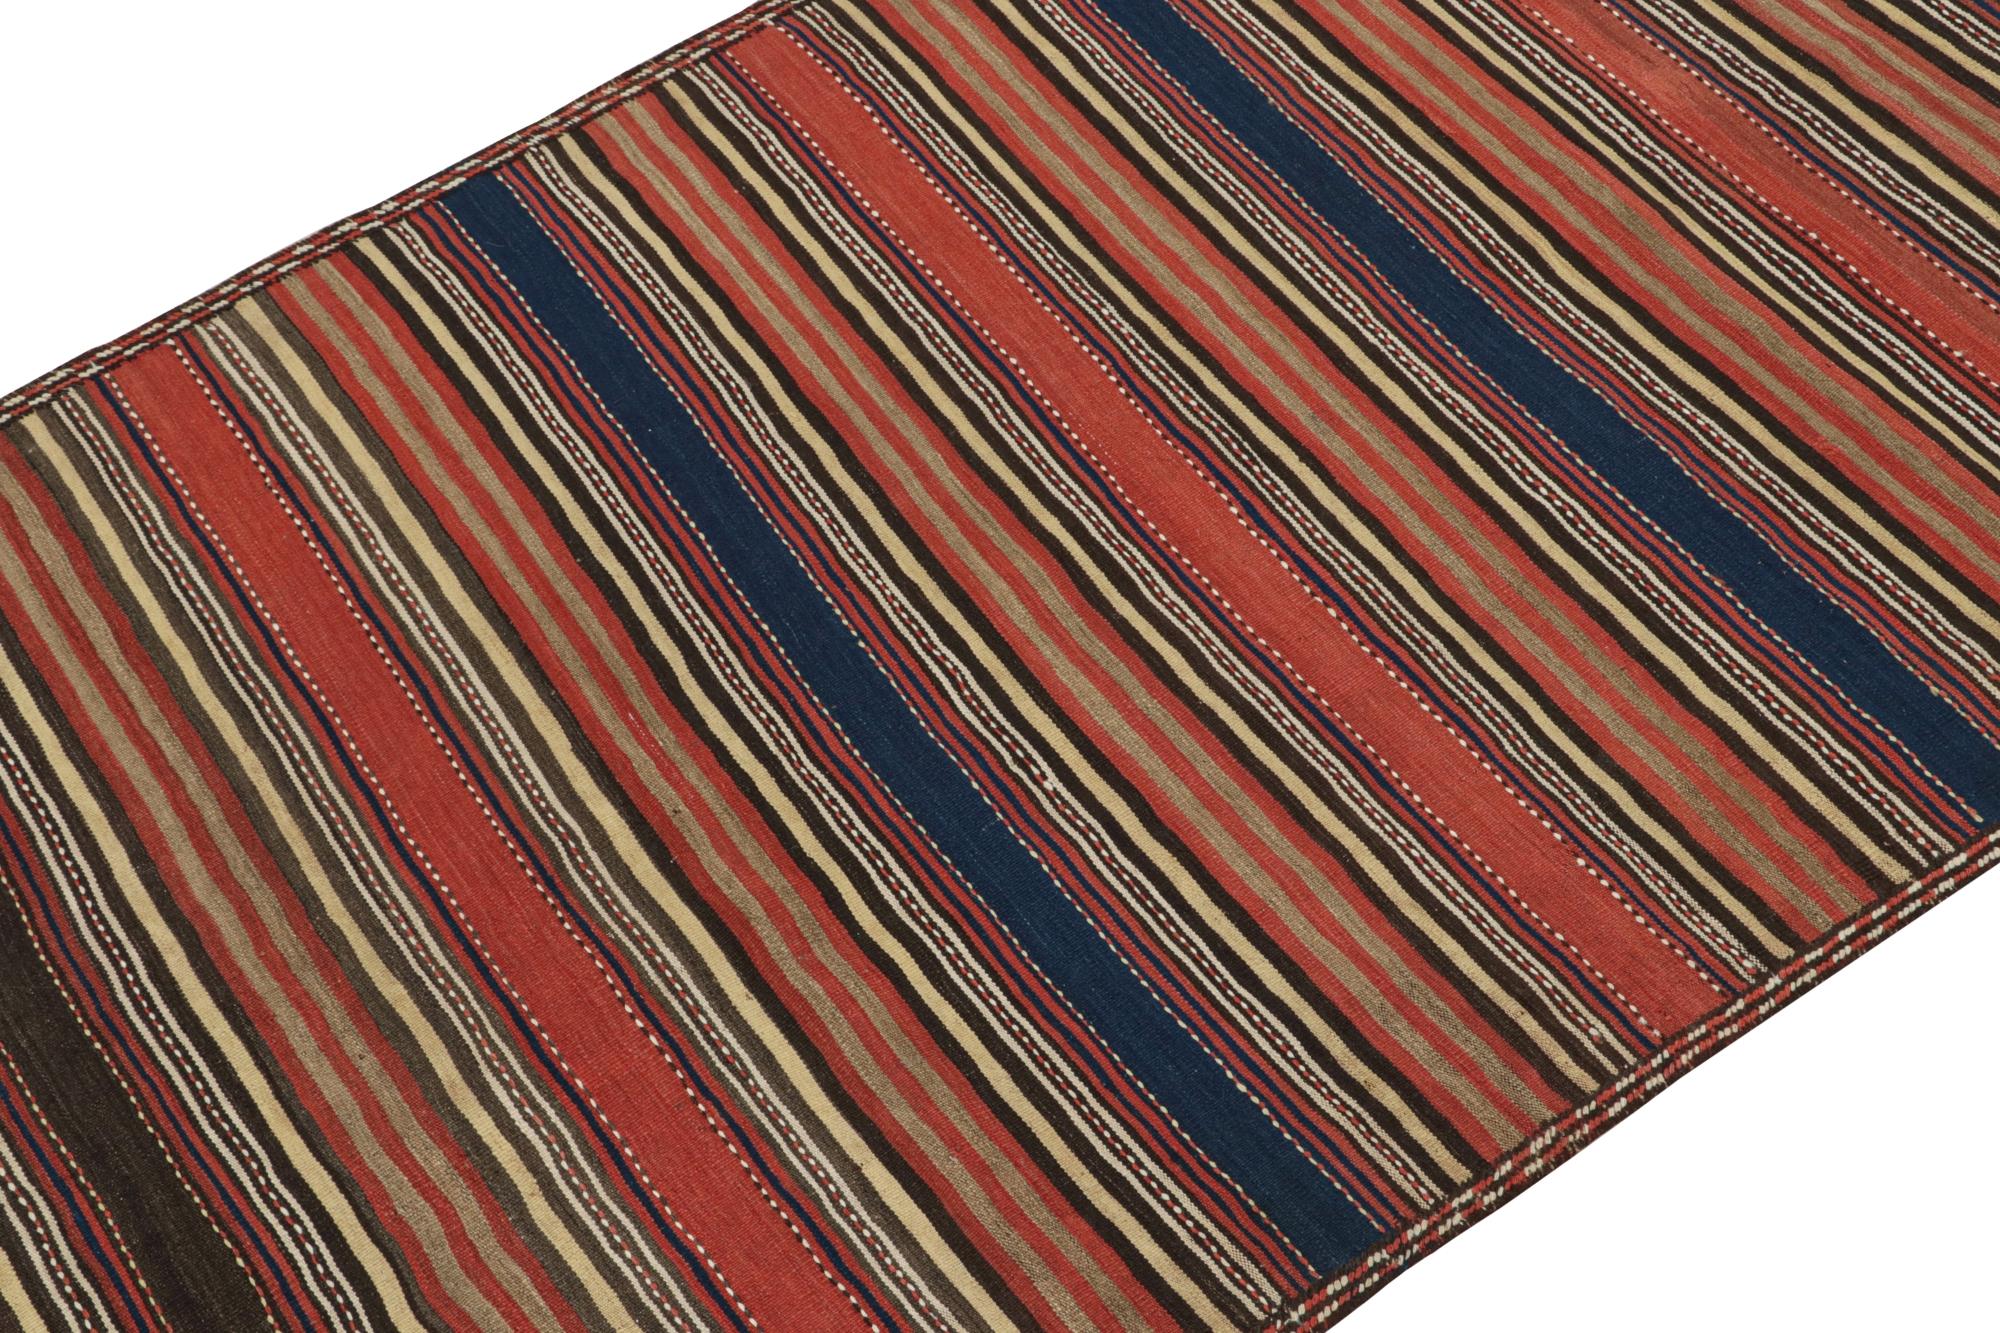 This vintage 4x9 Persian Kilim originates from Quchan city of the Khorasan province— handwoven in wool circa 1950-1960.

Its design is an all over pattern with stripes red, blue, beige, and rich brown, further enjoying mild embroidery. The look is